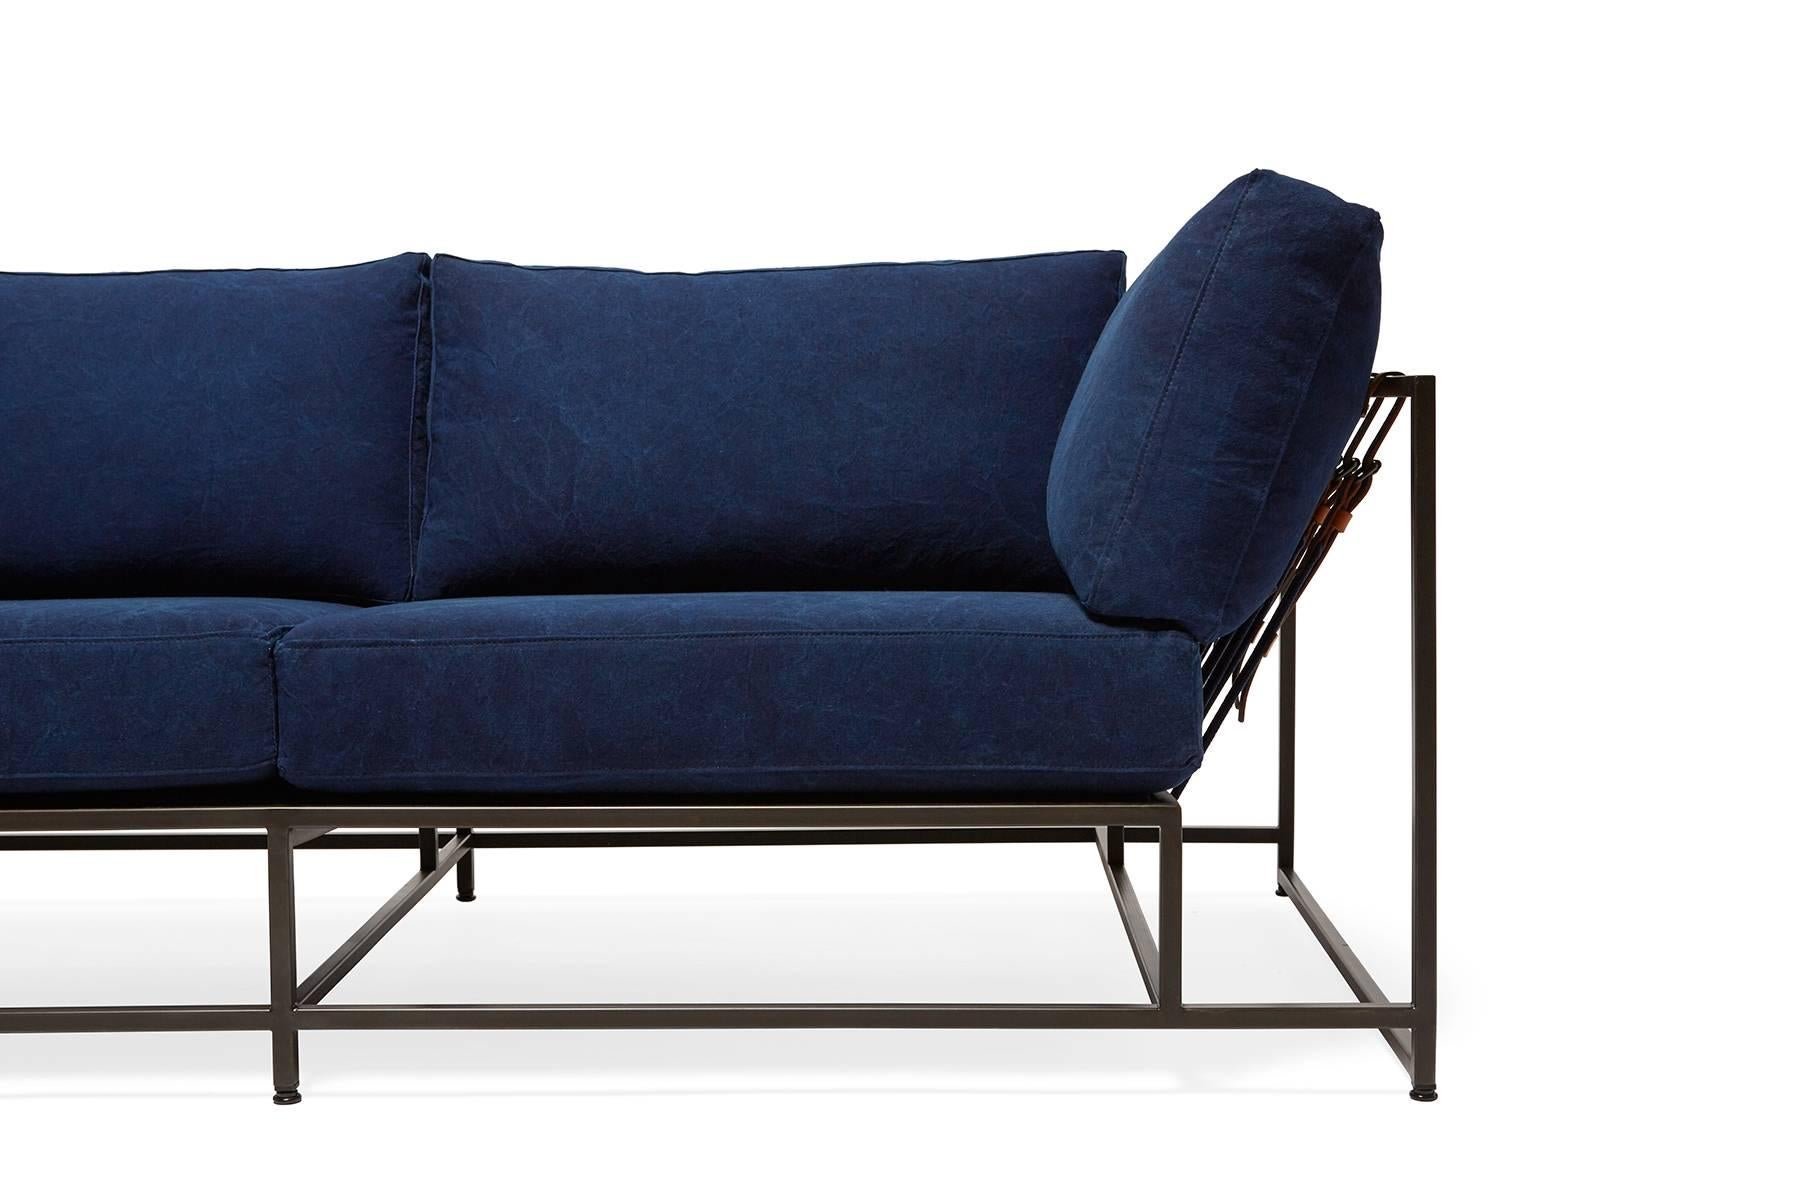 American Hand-Dyed Indigo Canvas and Blackened Steel Two-Seat Sofa For Sale